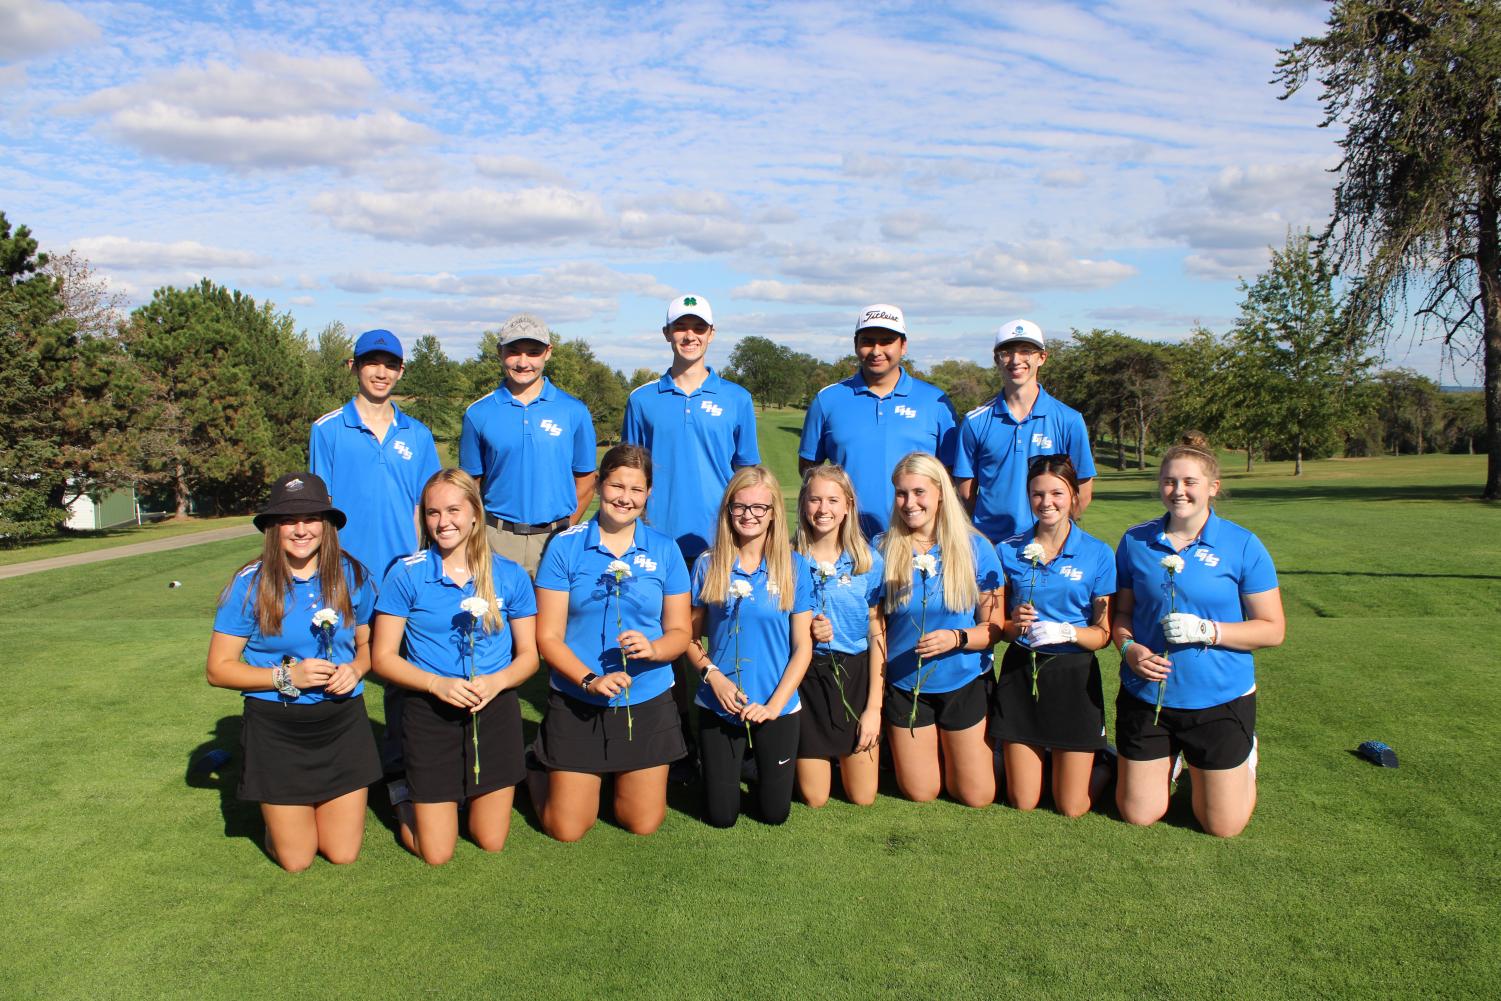 The GHS girls golf team ended their era with a bang winning their meet that night and advancing to sectionals. The meet took place on September 21 as they won against Eastland. The seniors are happy with how the season went and couldn’t have asked for a better team. “Although my school golf career is over, I couldn’t be happier with how the season went and all the amazing relationships I created with my teammates the past years,” said Olivia Richardson.